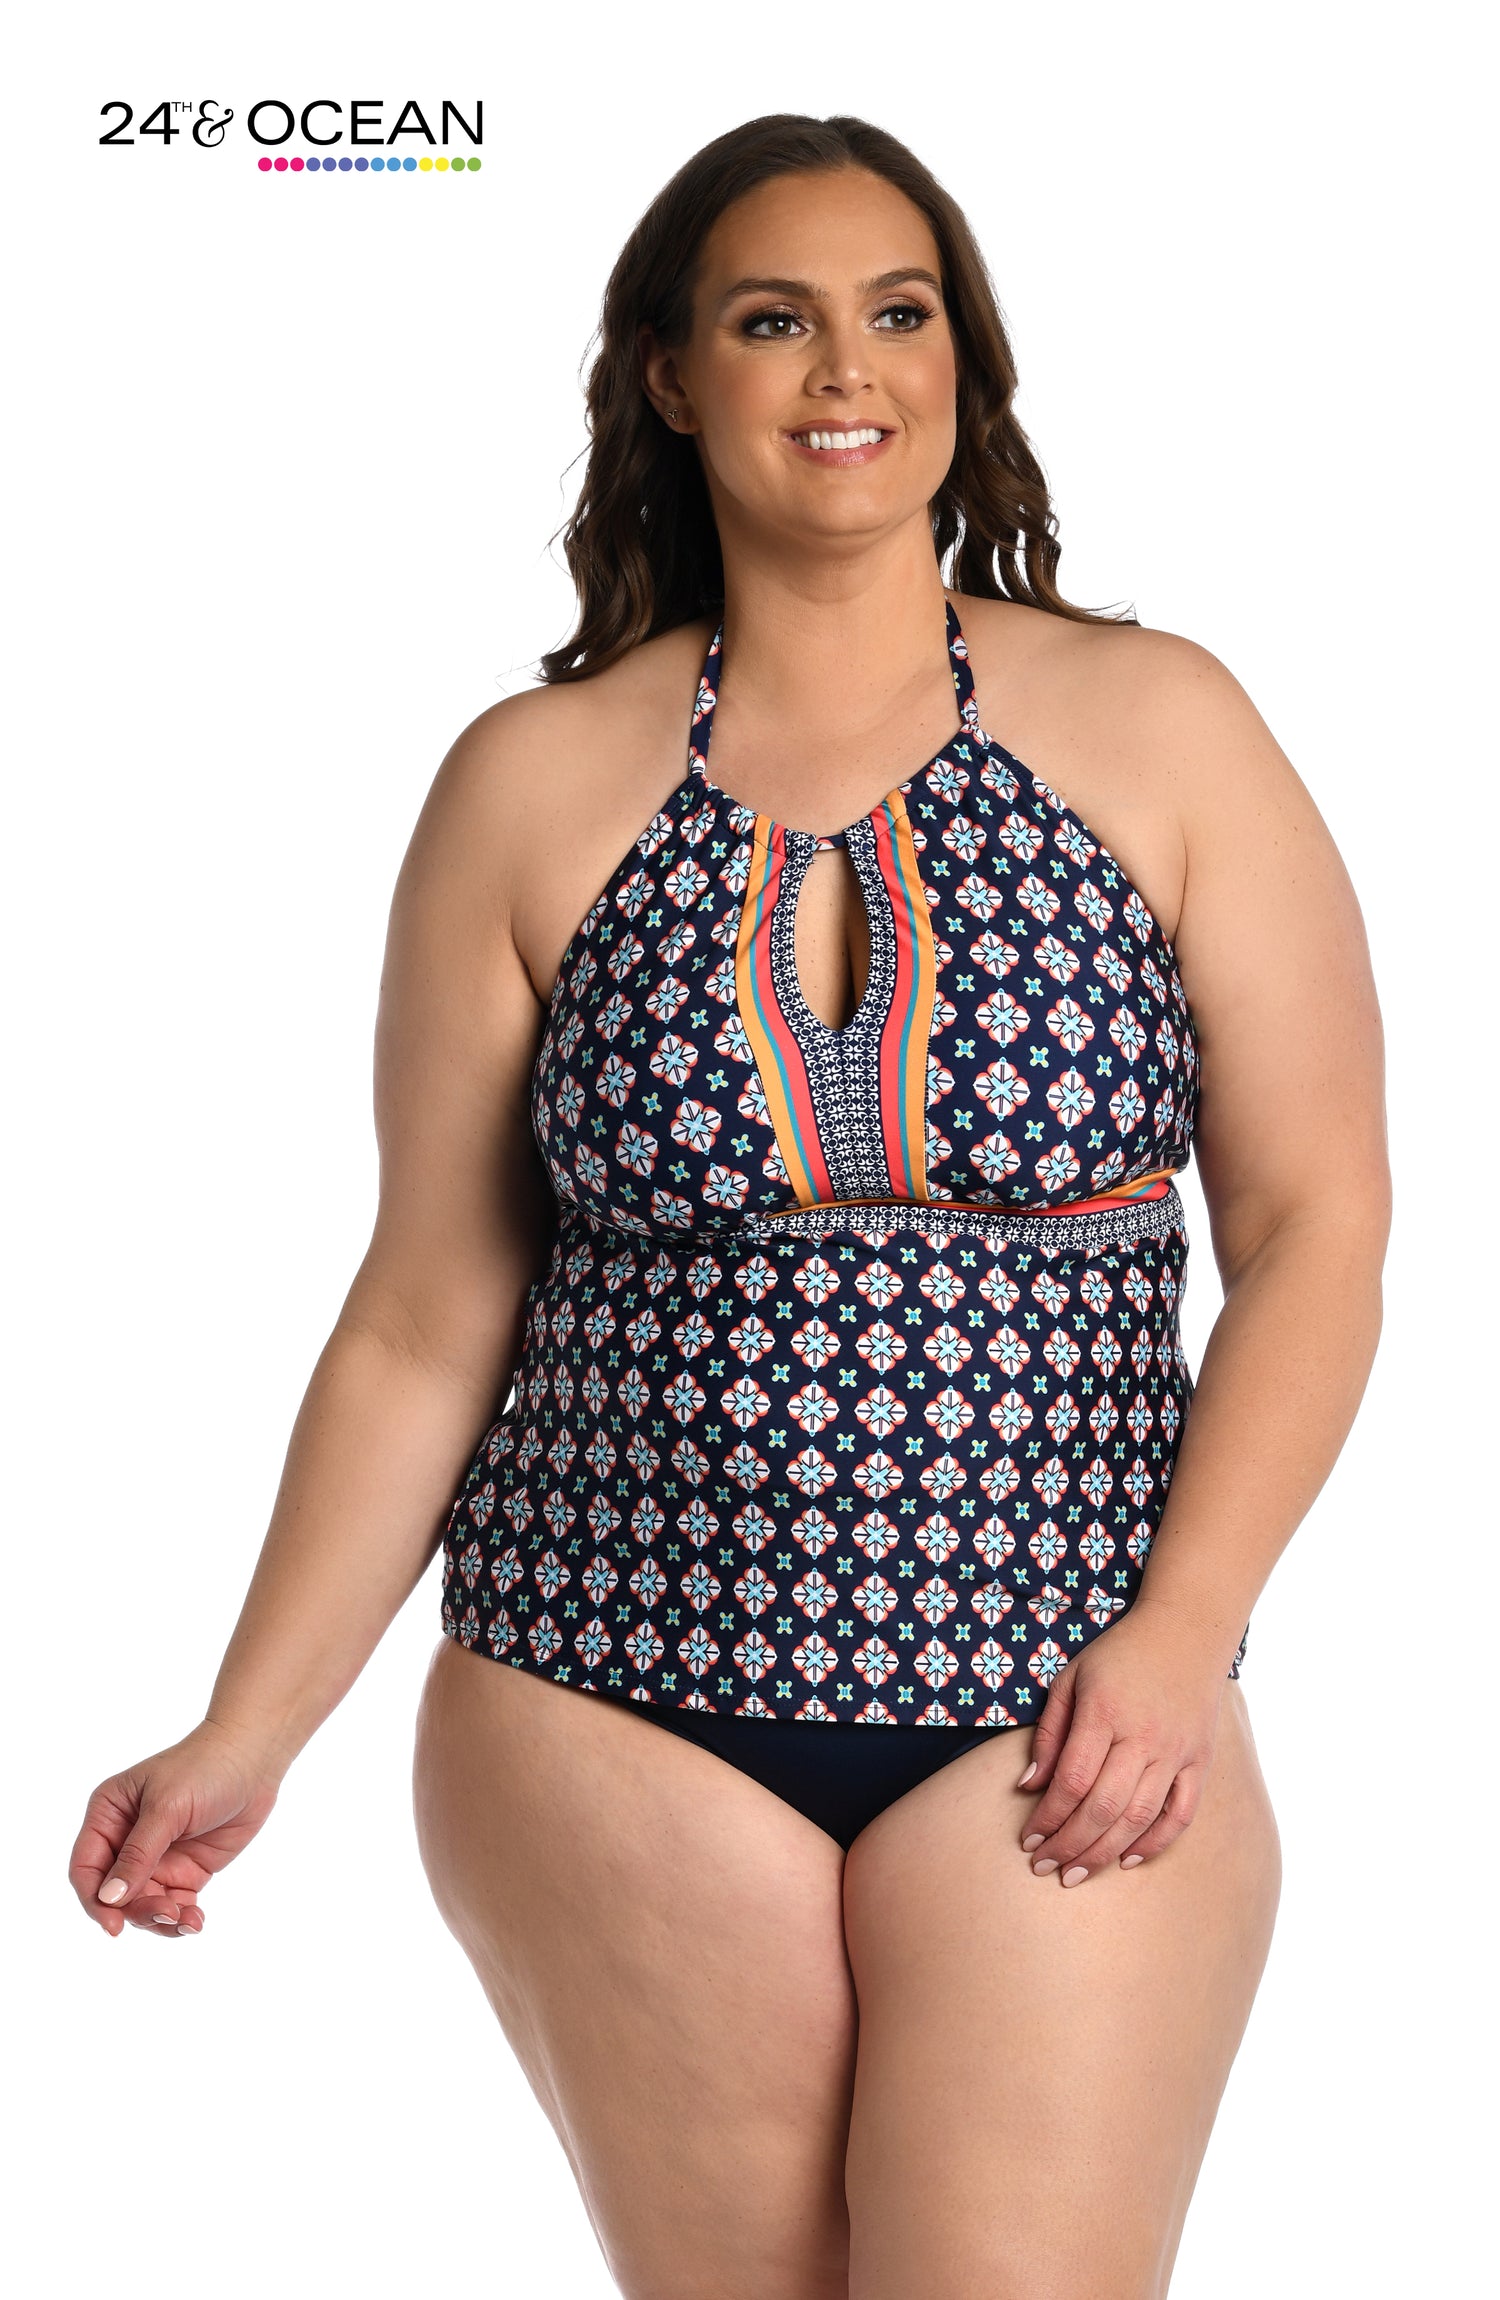 Model is wearing a midnight multi colored geometric printed high neck tankini top from our Alexandria Tile collection!